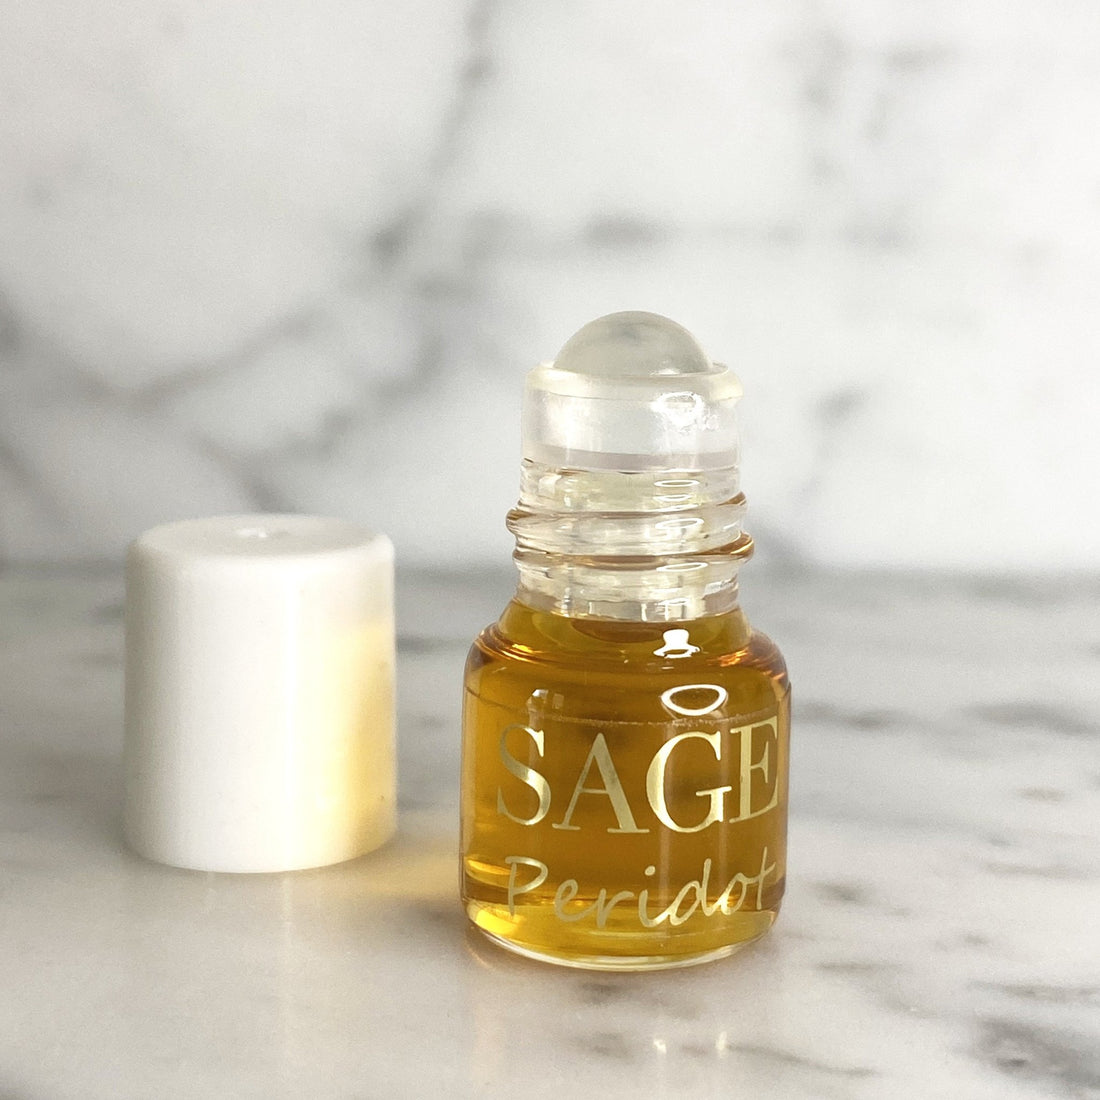 Diamond Perfume Oil Concentrate Sample by Sage